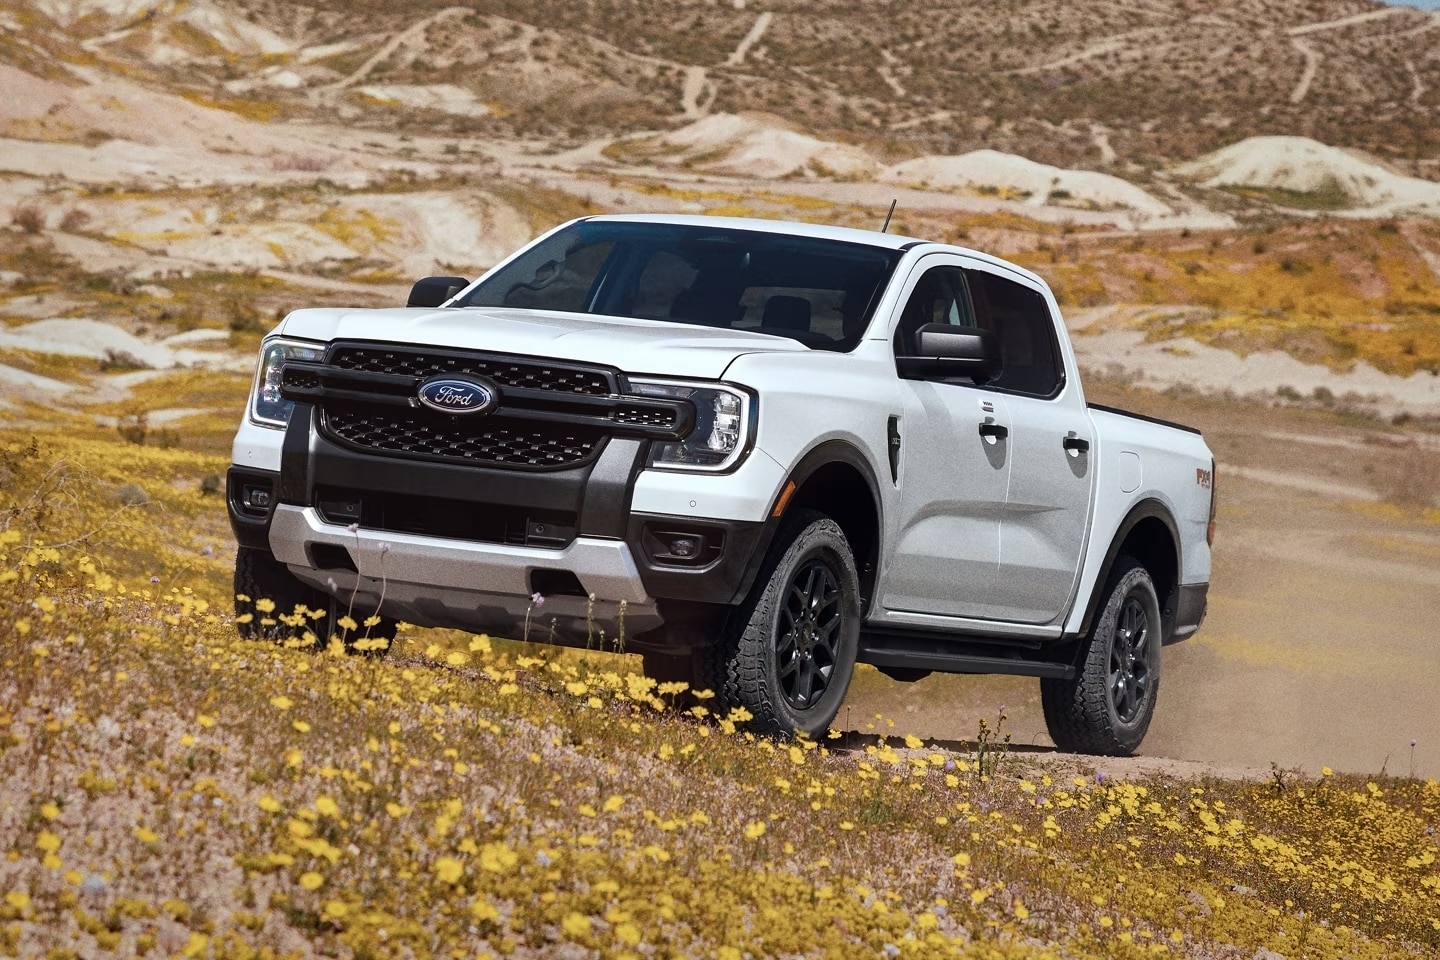 Ford Ranger through the years